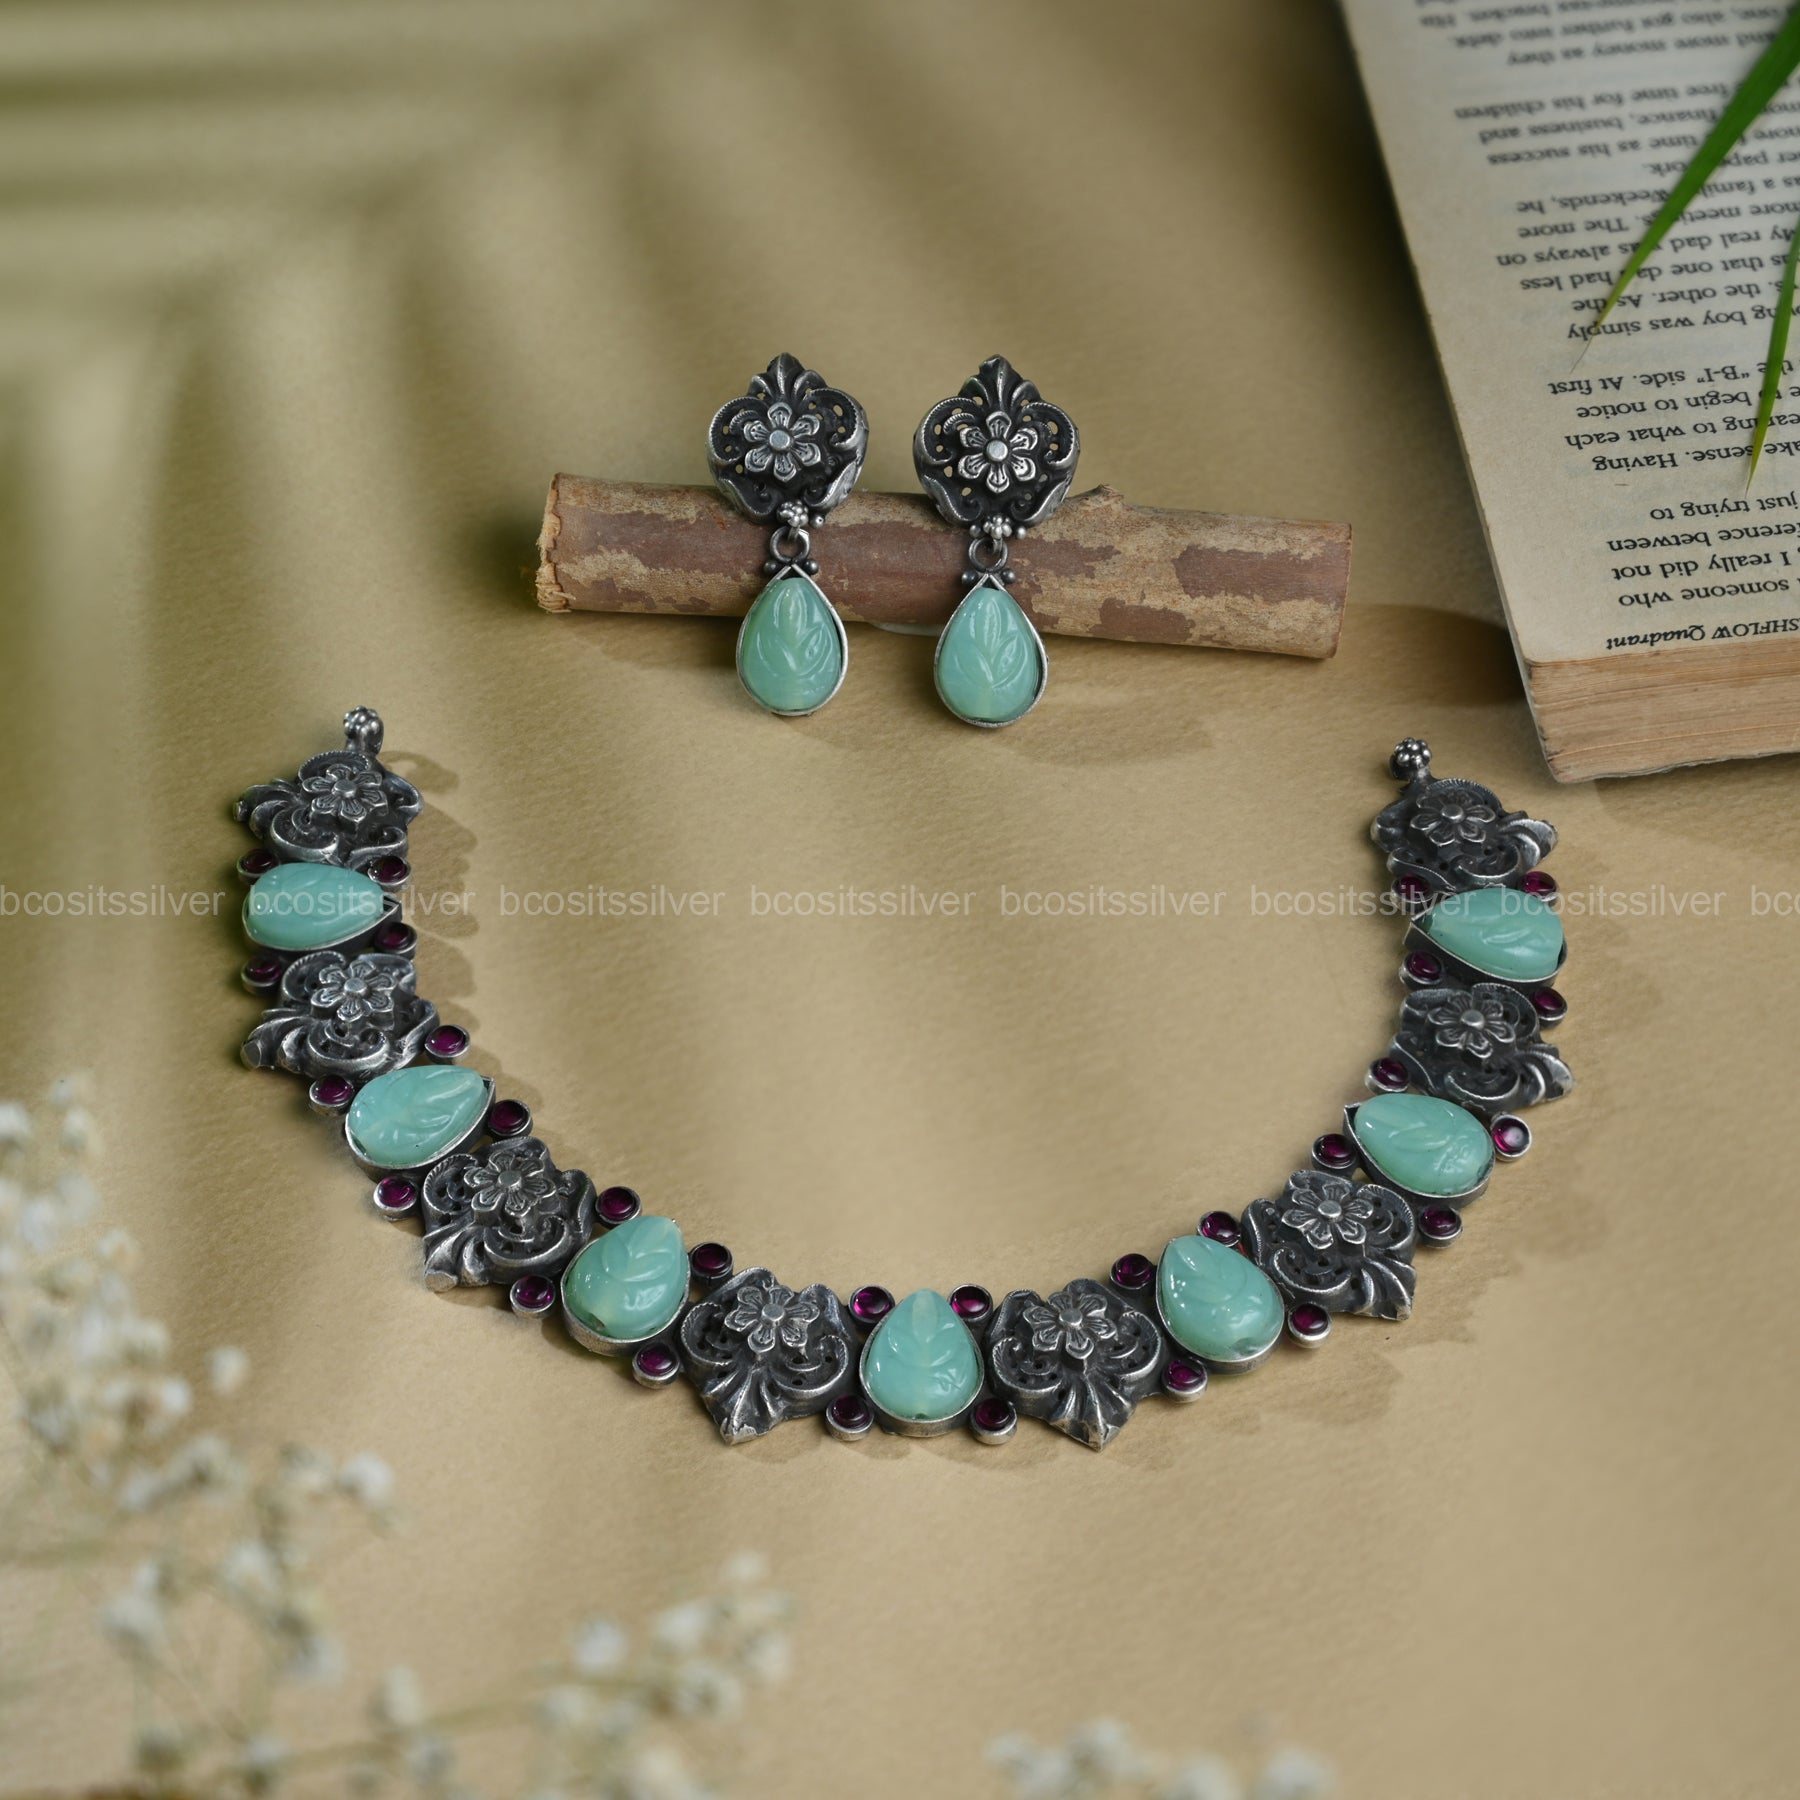 Oxidized Flower Bookly Necklace - 197